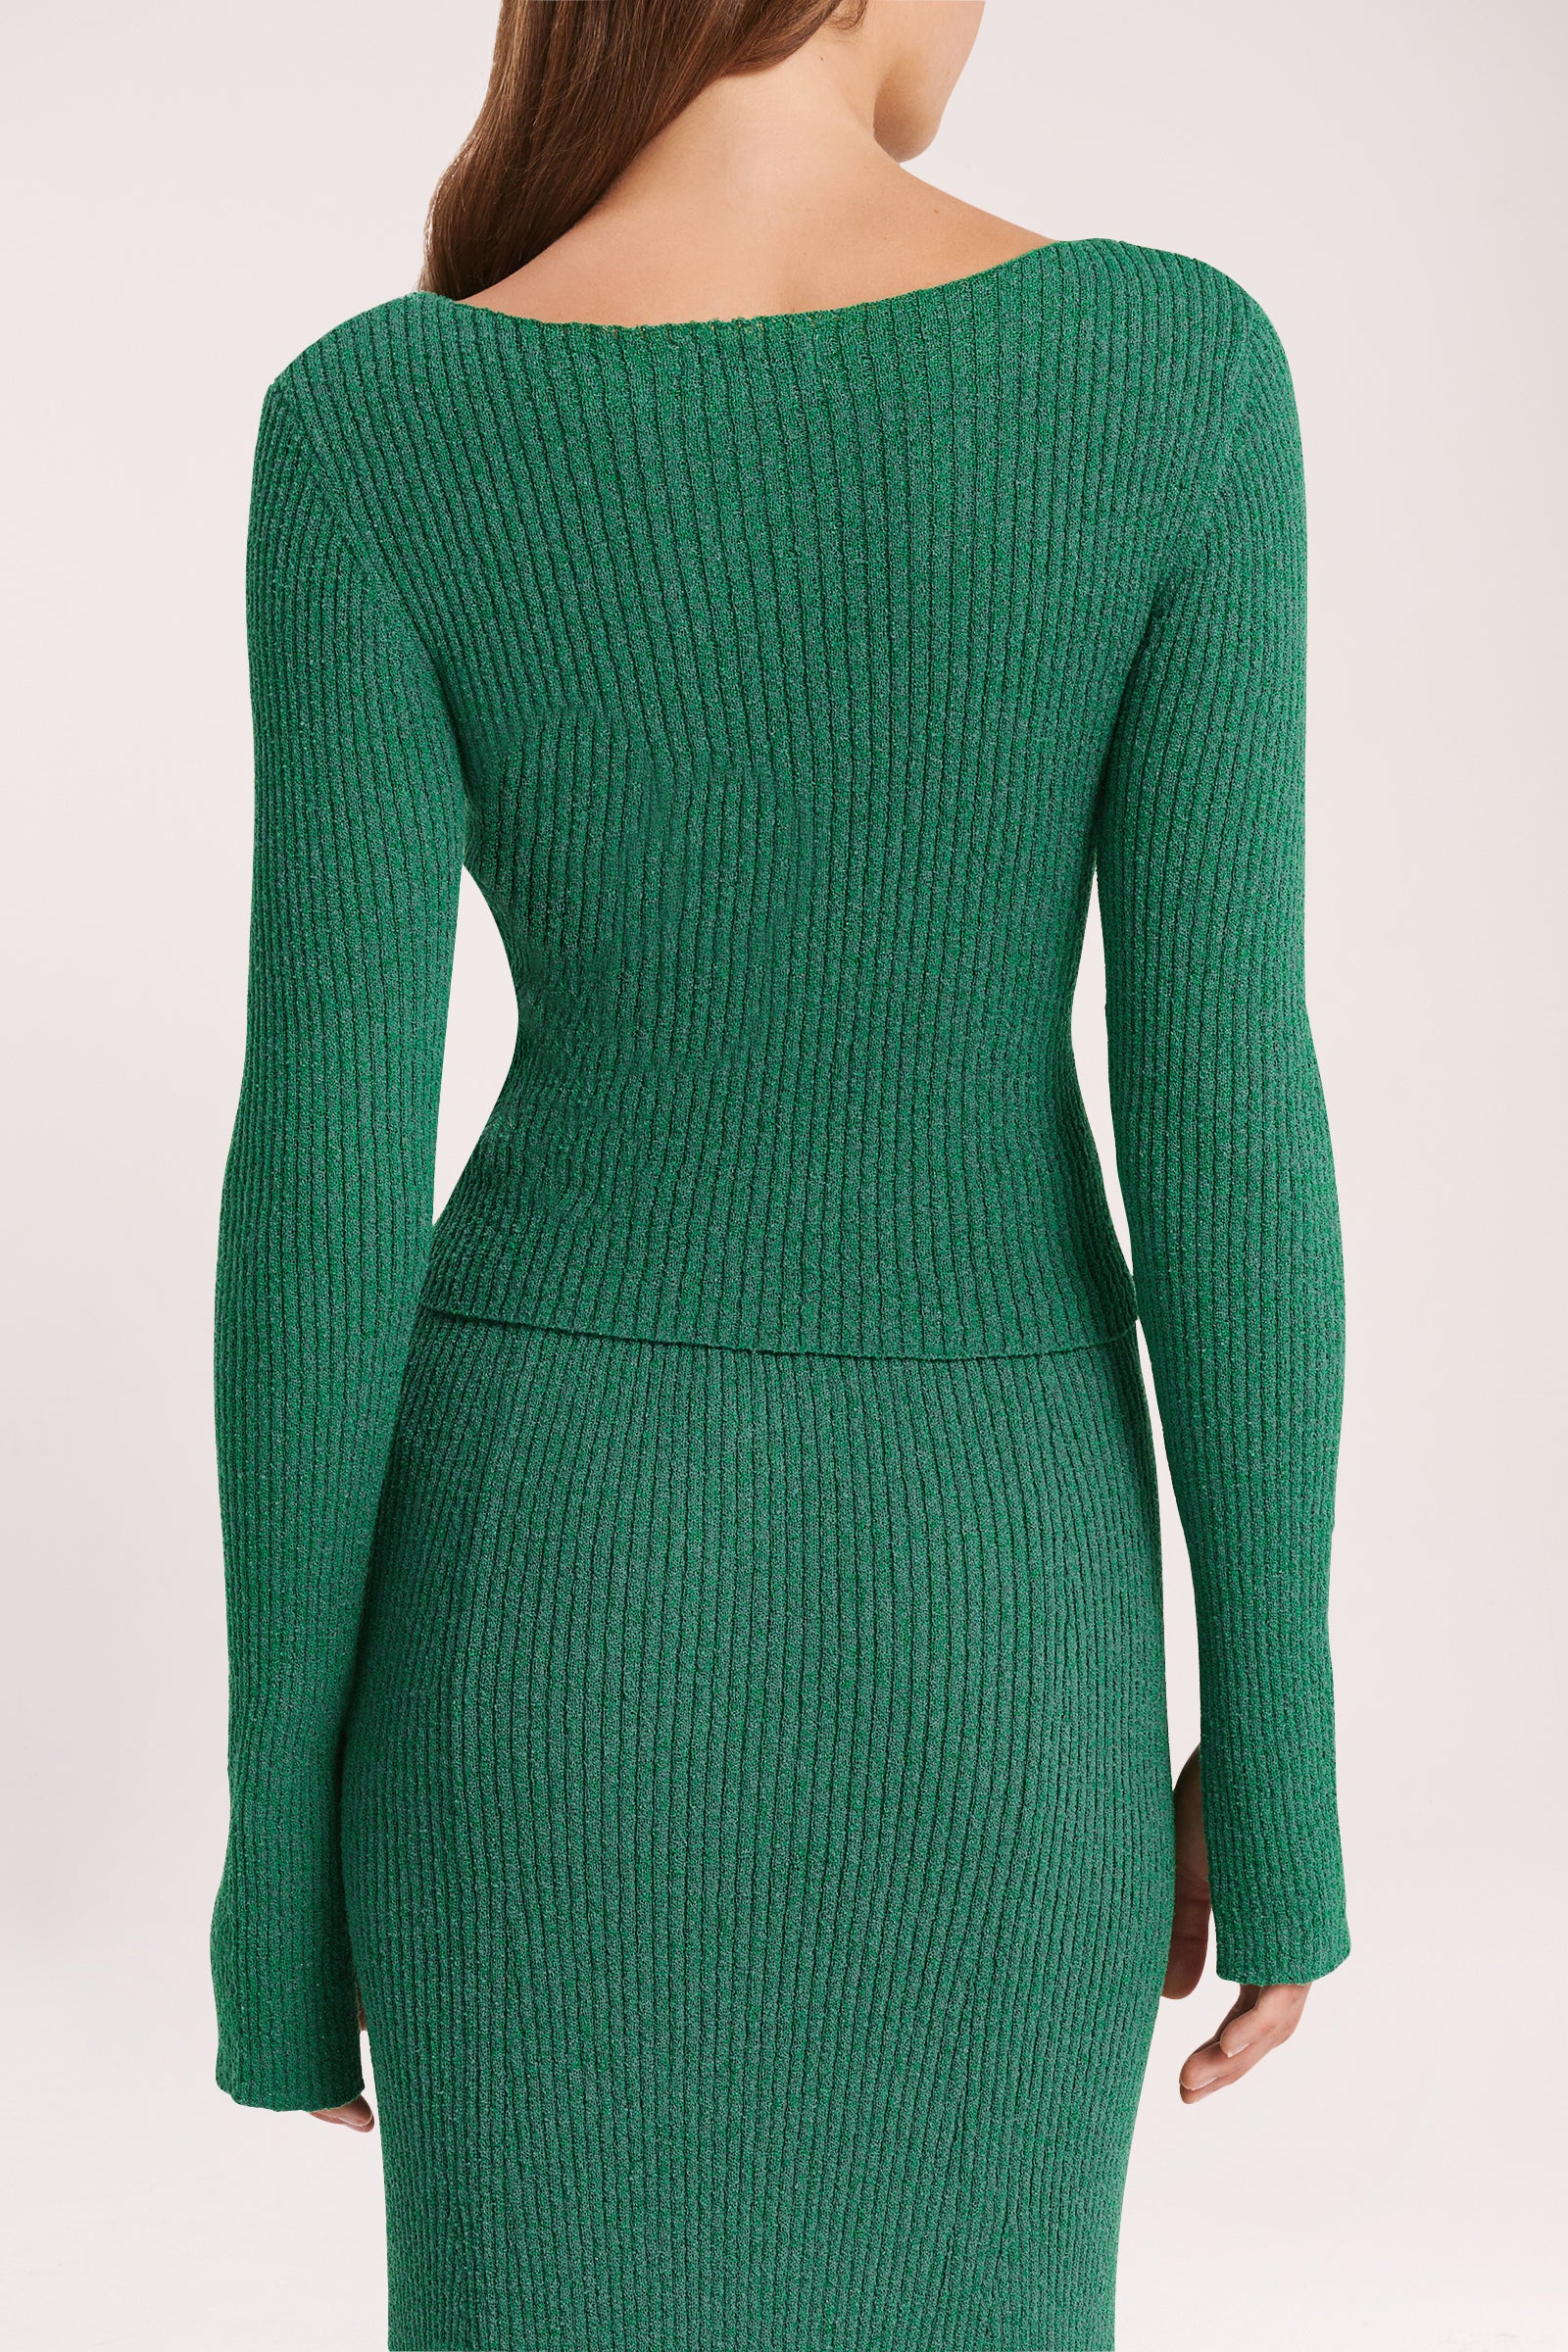 Nude Lucy Dune Long Sleeve Knit In a Green Lotus Colour